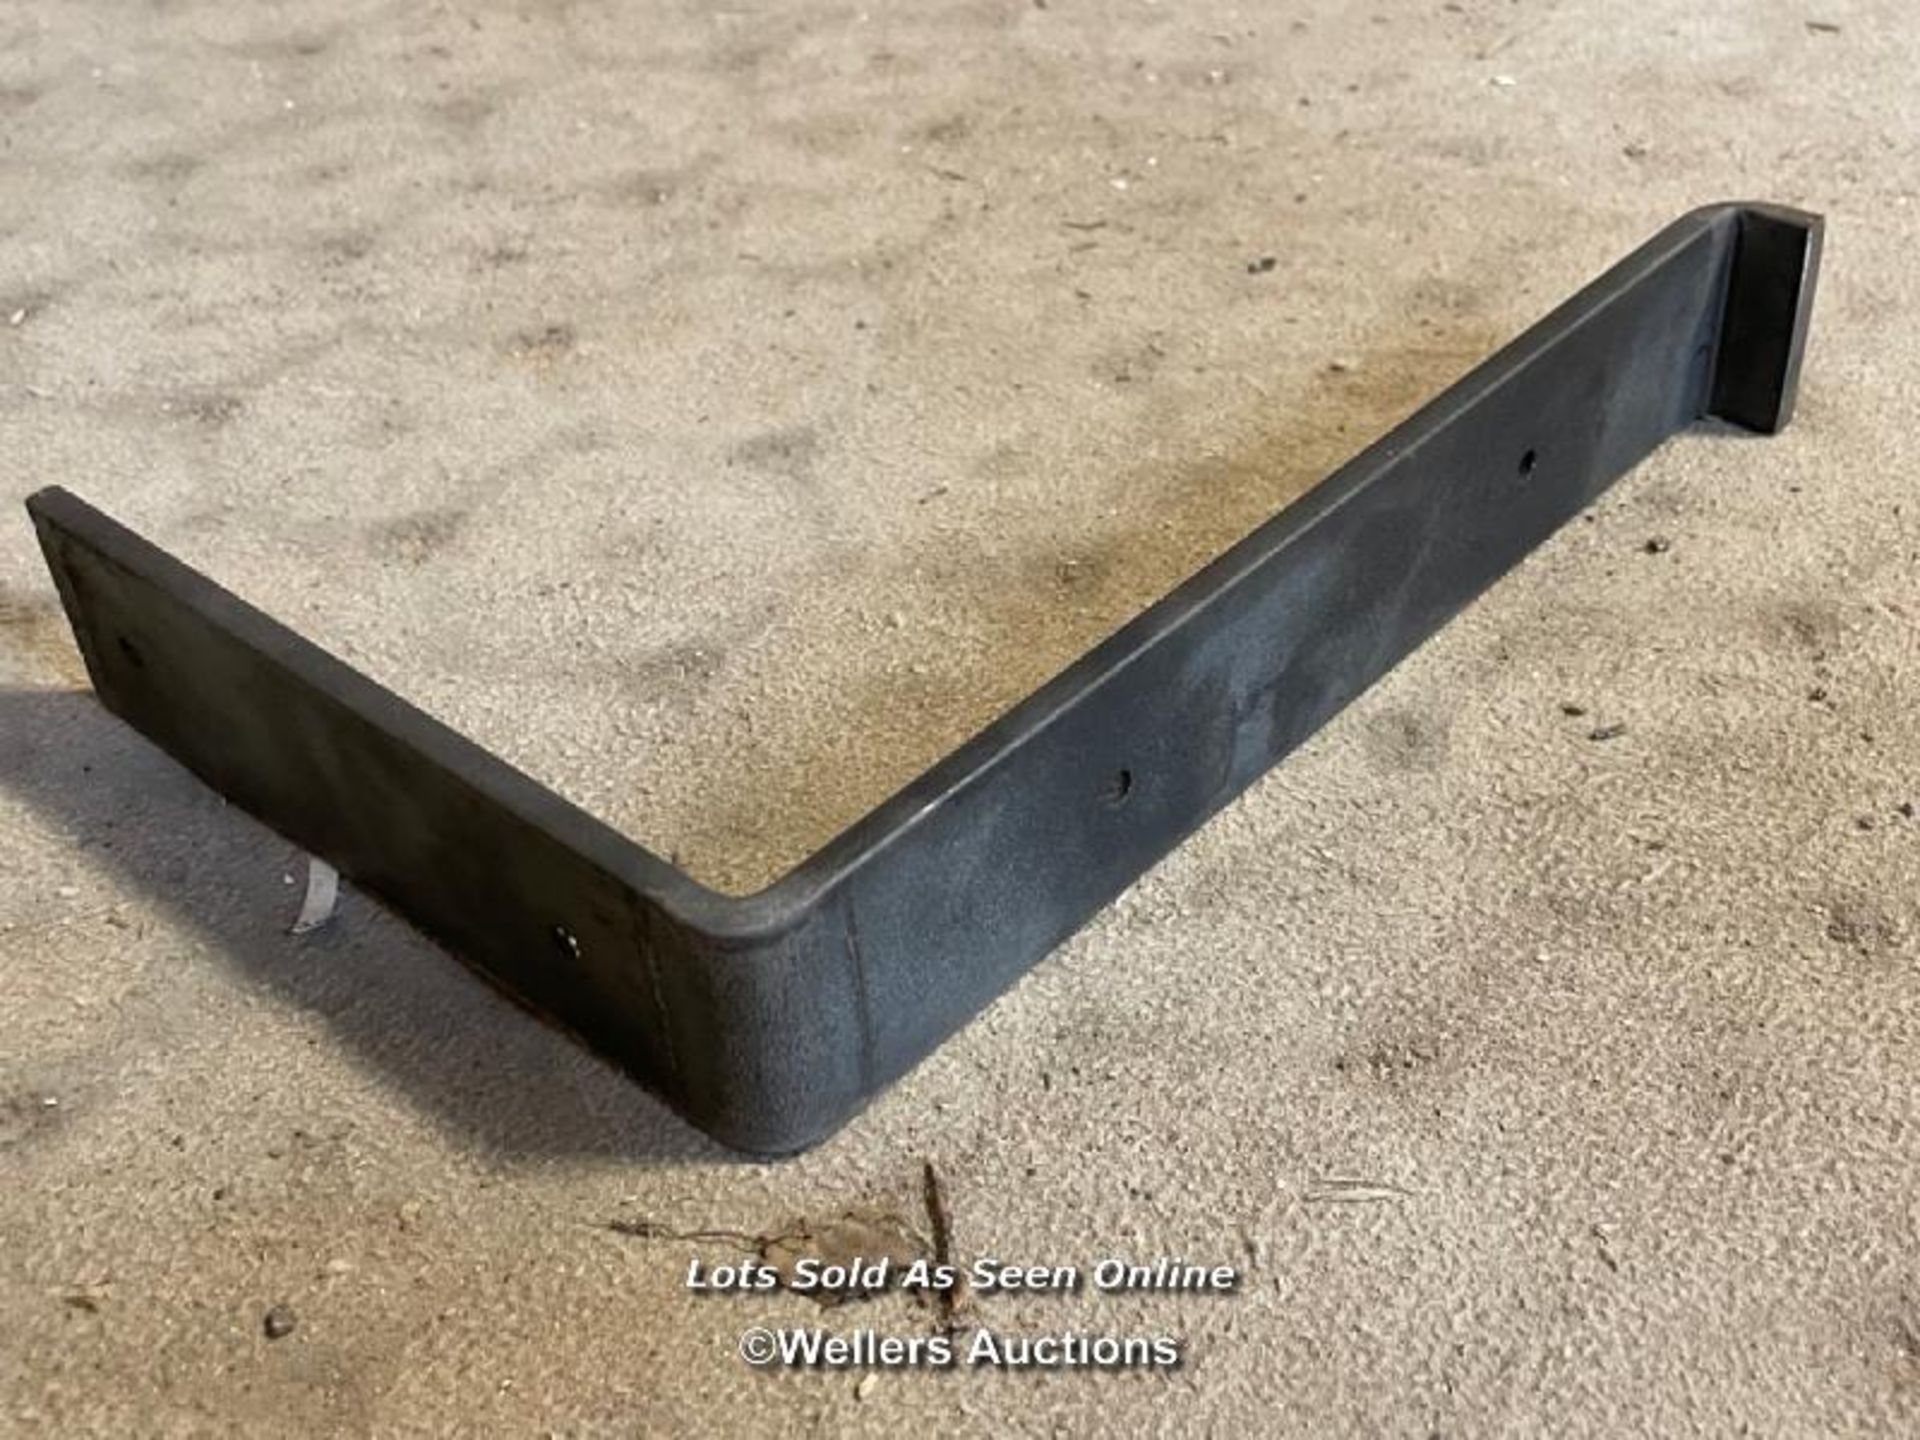 50 metal shelf brackets. 23cm x 15.5cm x 4cm for scaffold boards or other shelving - Image 2 of 5